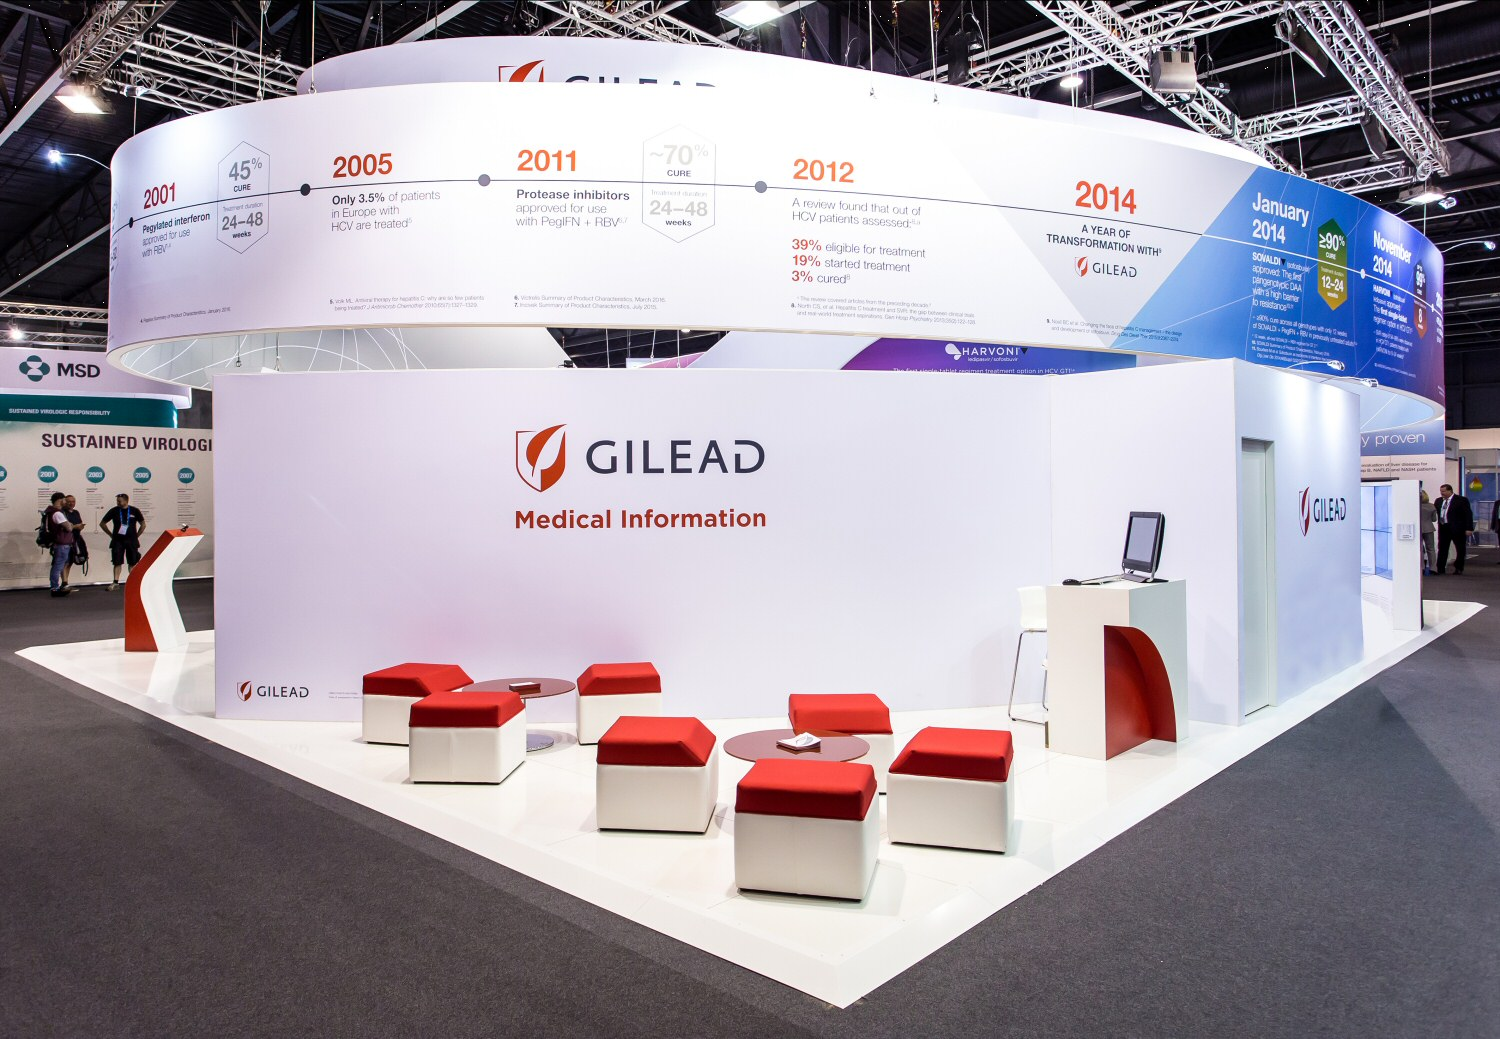 Gilead Sciences Receives the US FDA Advisory Committee's Recommendation on Approval of Descovy for PrEP